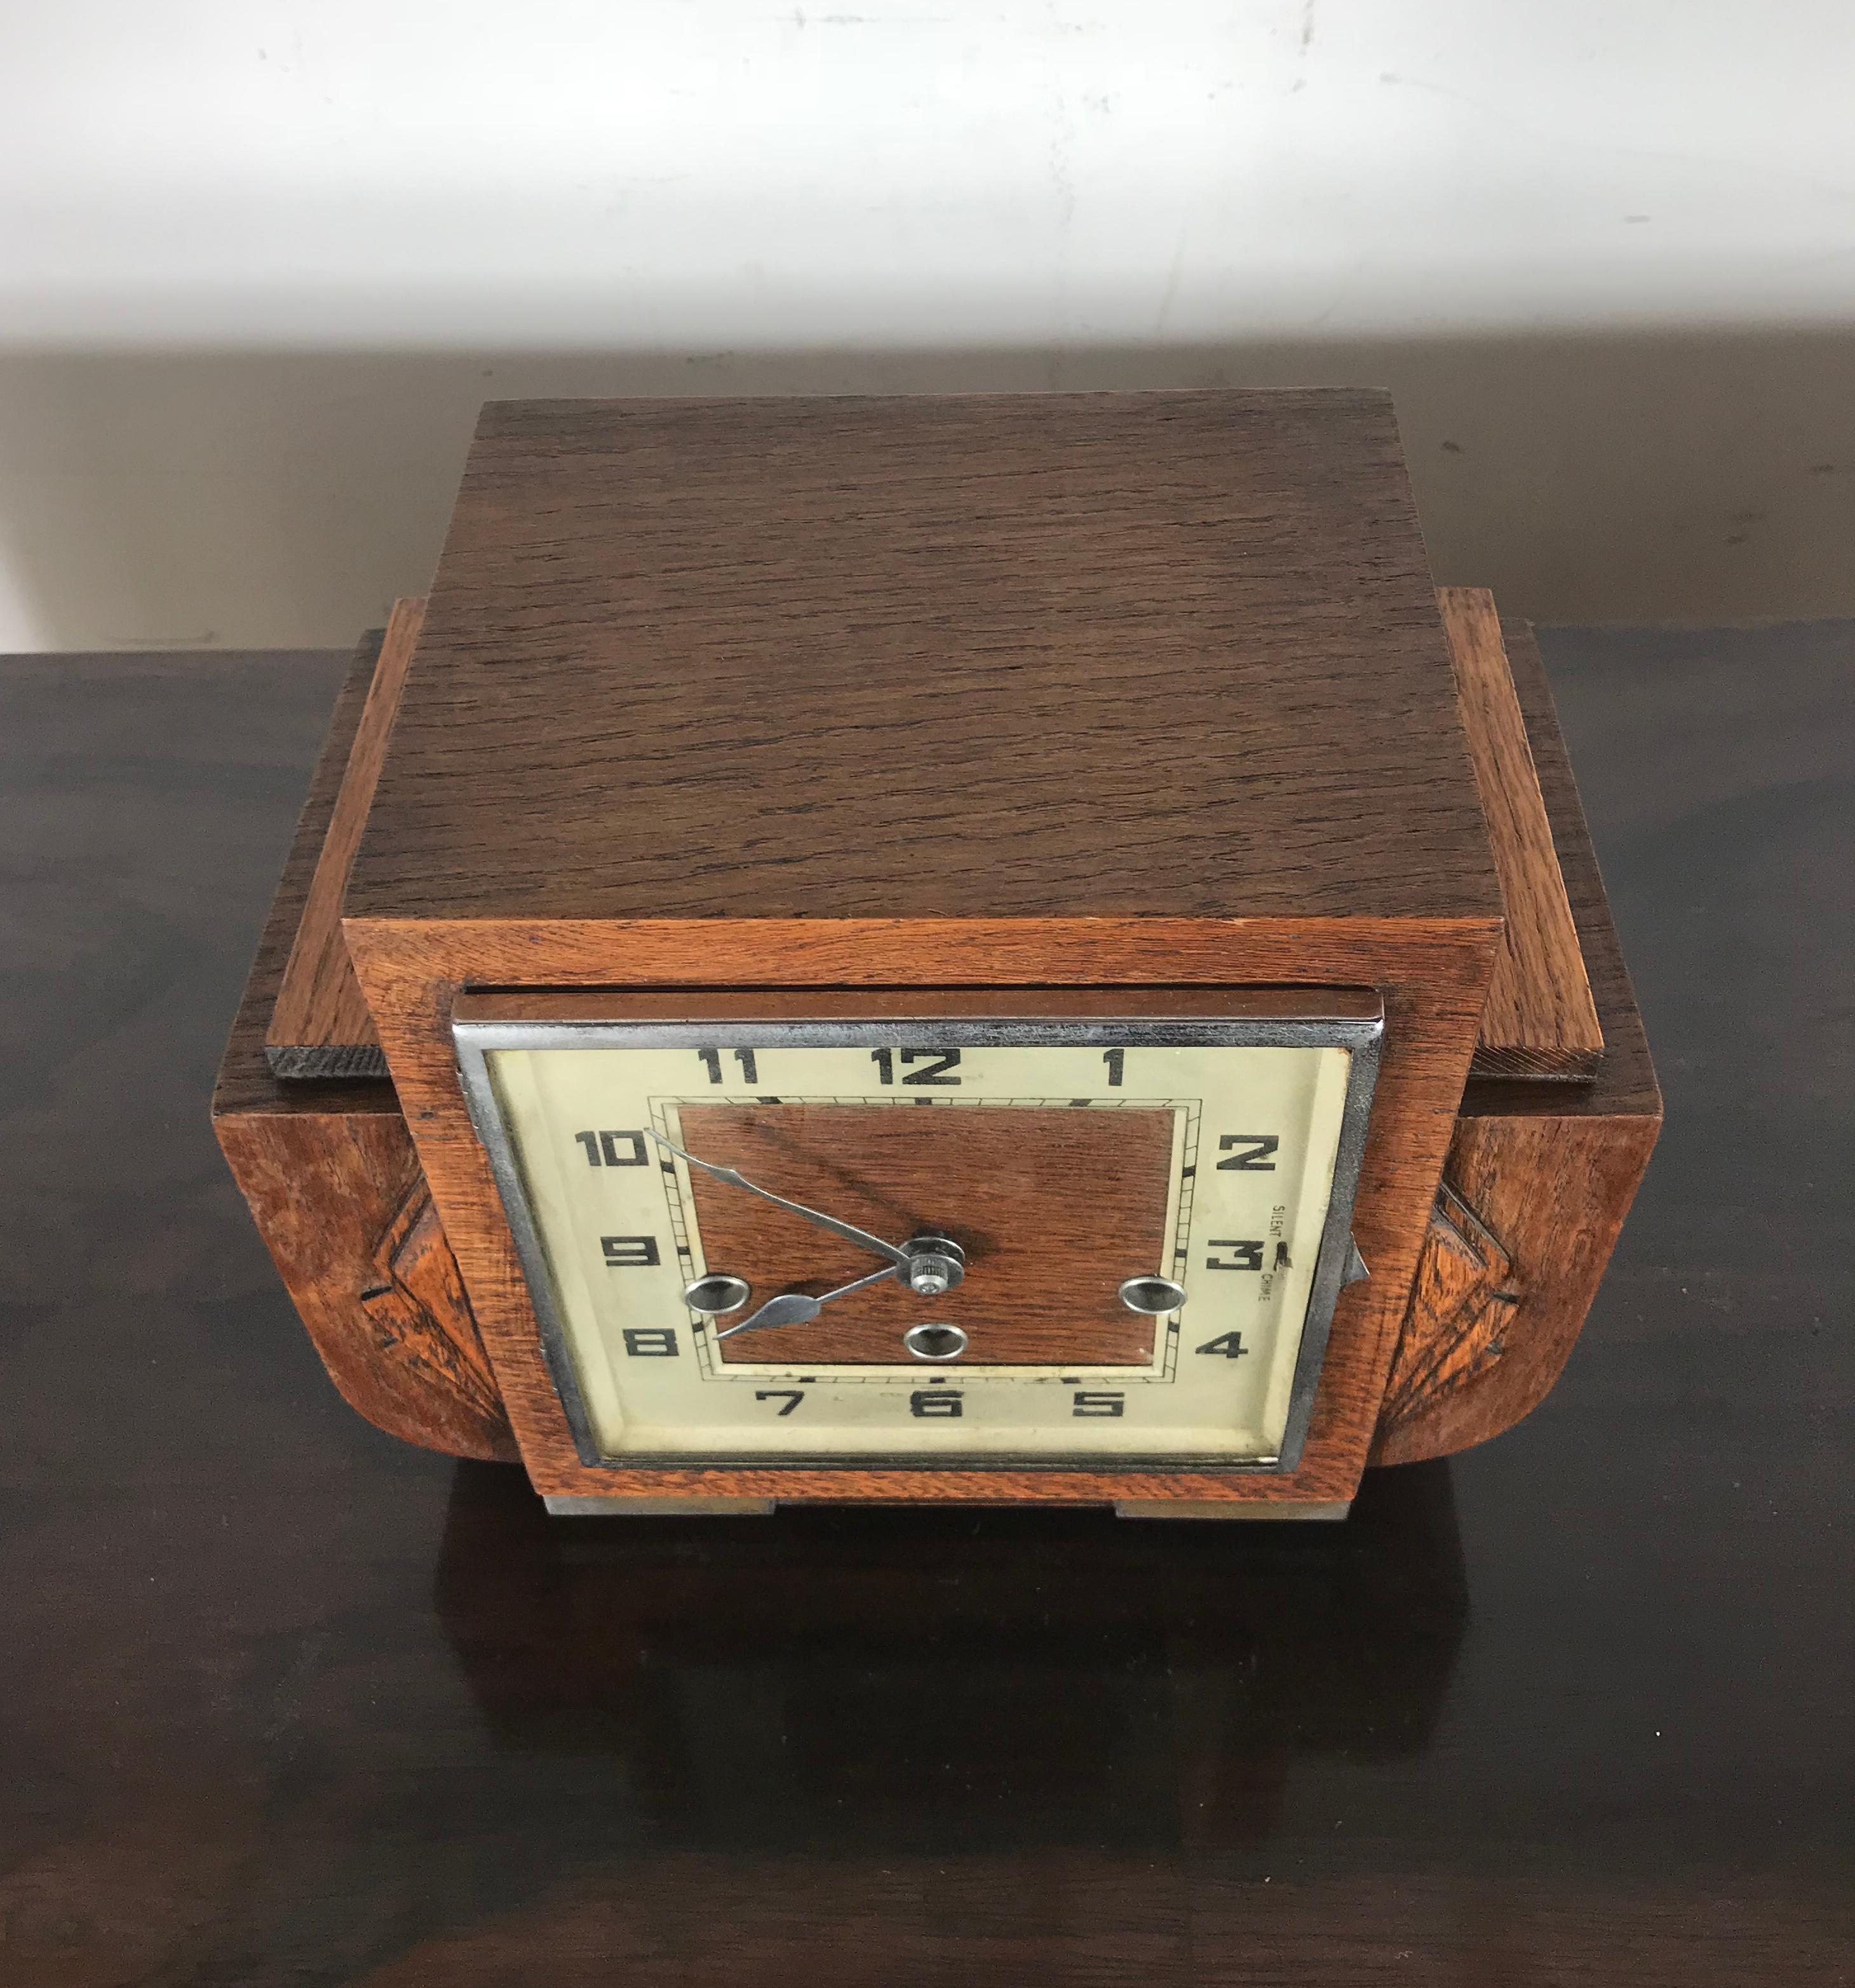 French Art Deco mantel clock, 1930s. Beautiful mixed wood and style. Strikes every 15 minutes, in perfect working order.